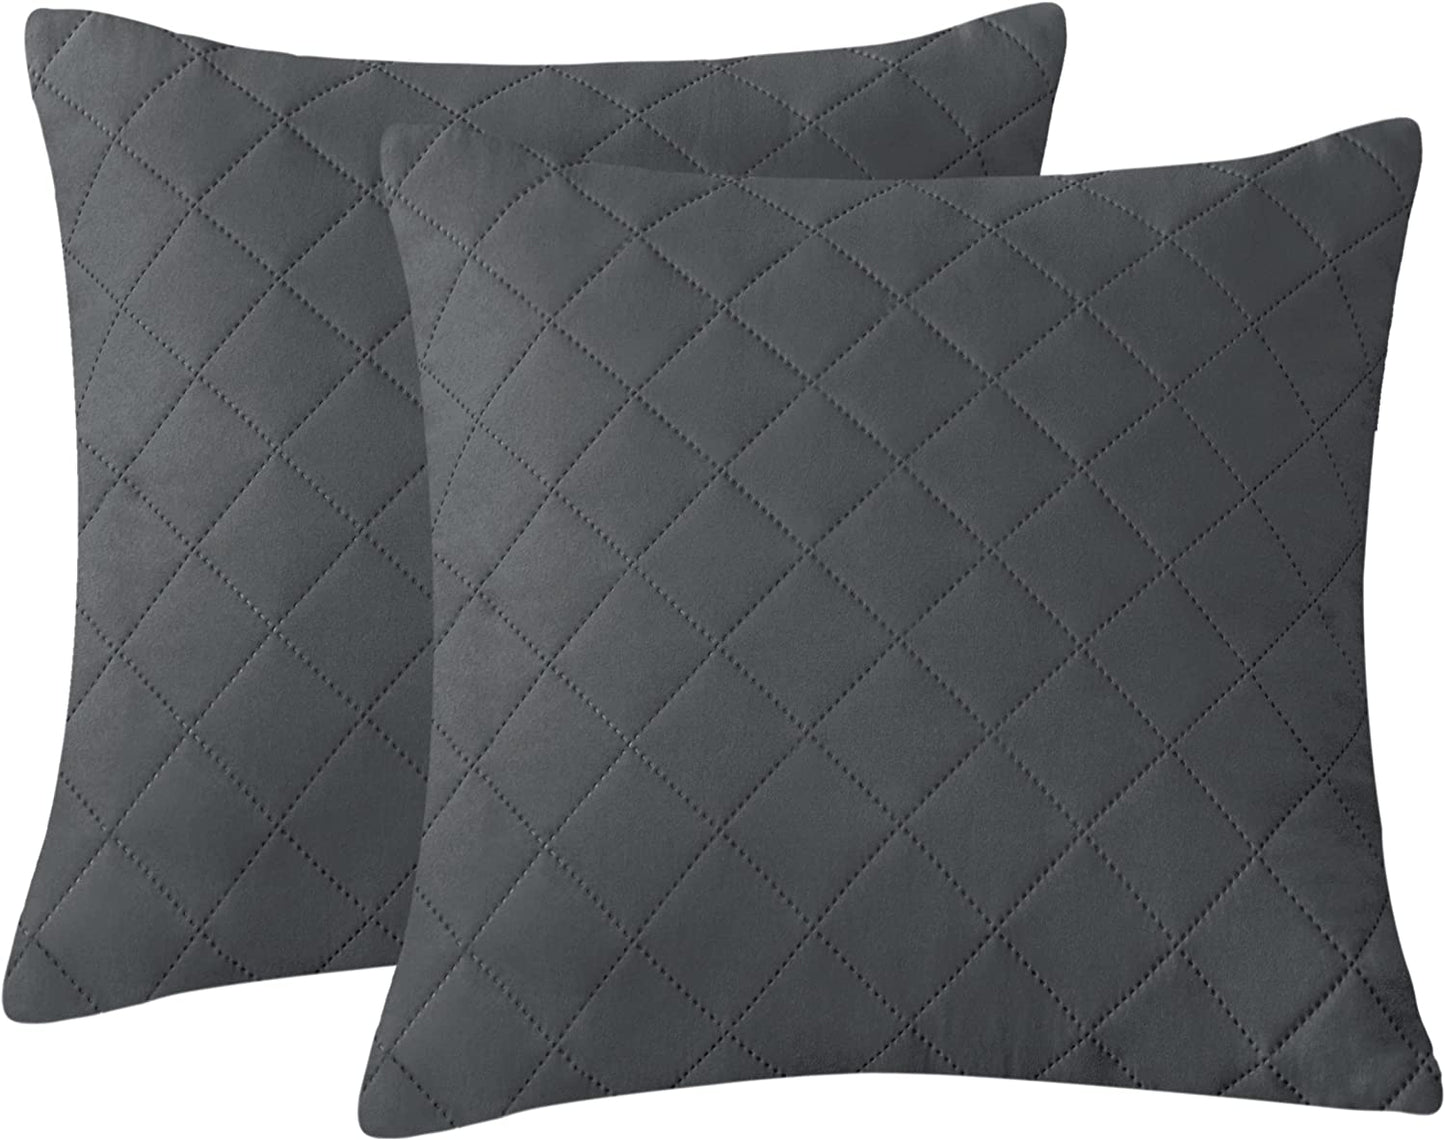 QUILTED CUSHION COVER SQUARE PATTERN 16 X 16 INCHES - GREY